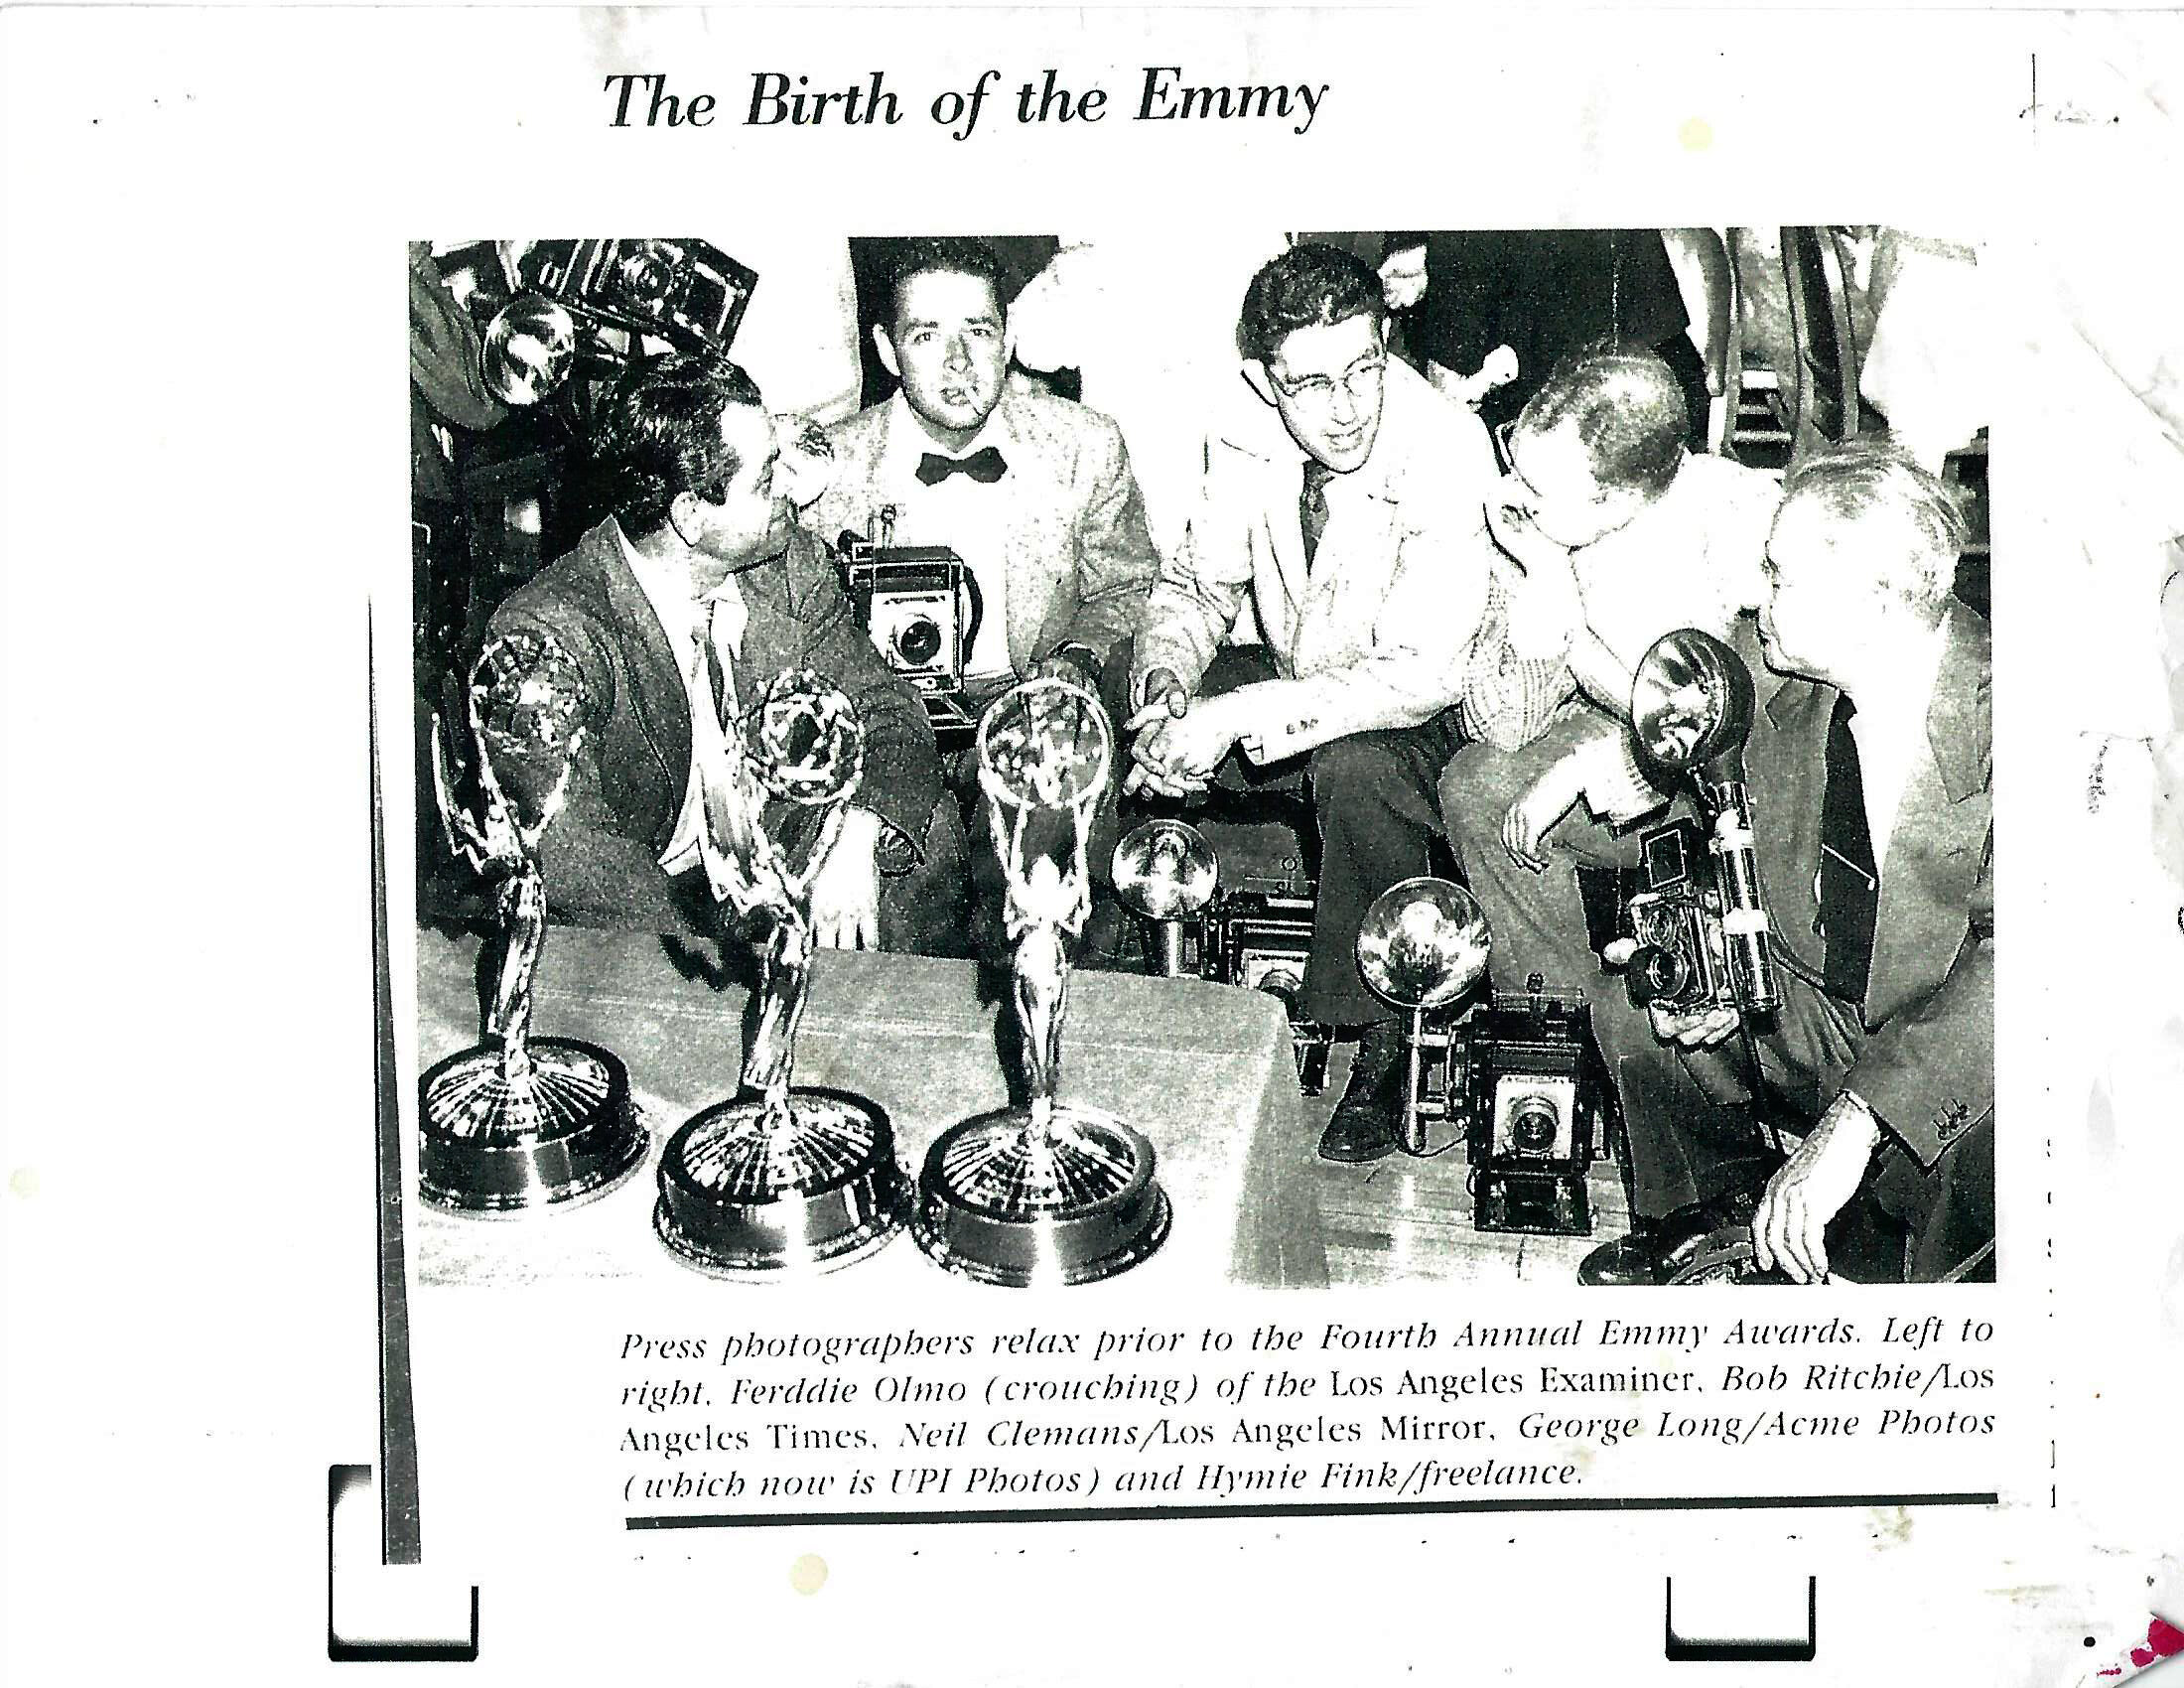  They didn't win these, but they photographed the event. The names are in the caption. It it was the 4th Emmy awards. 